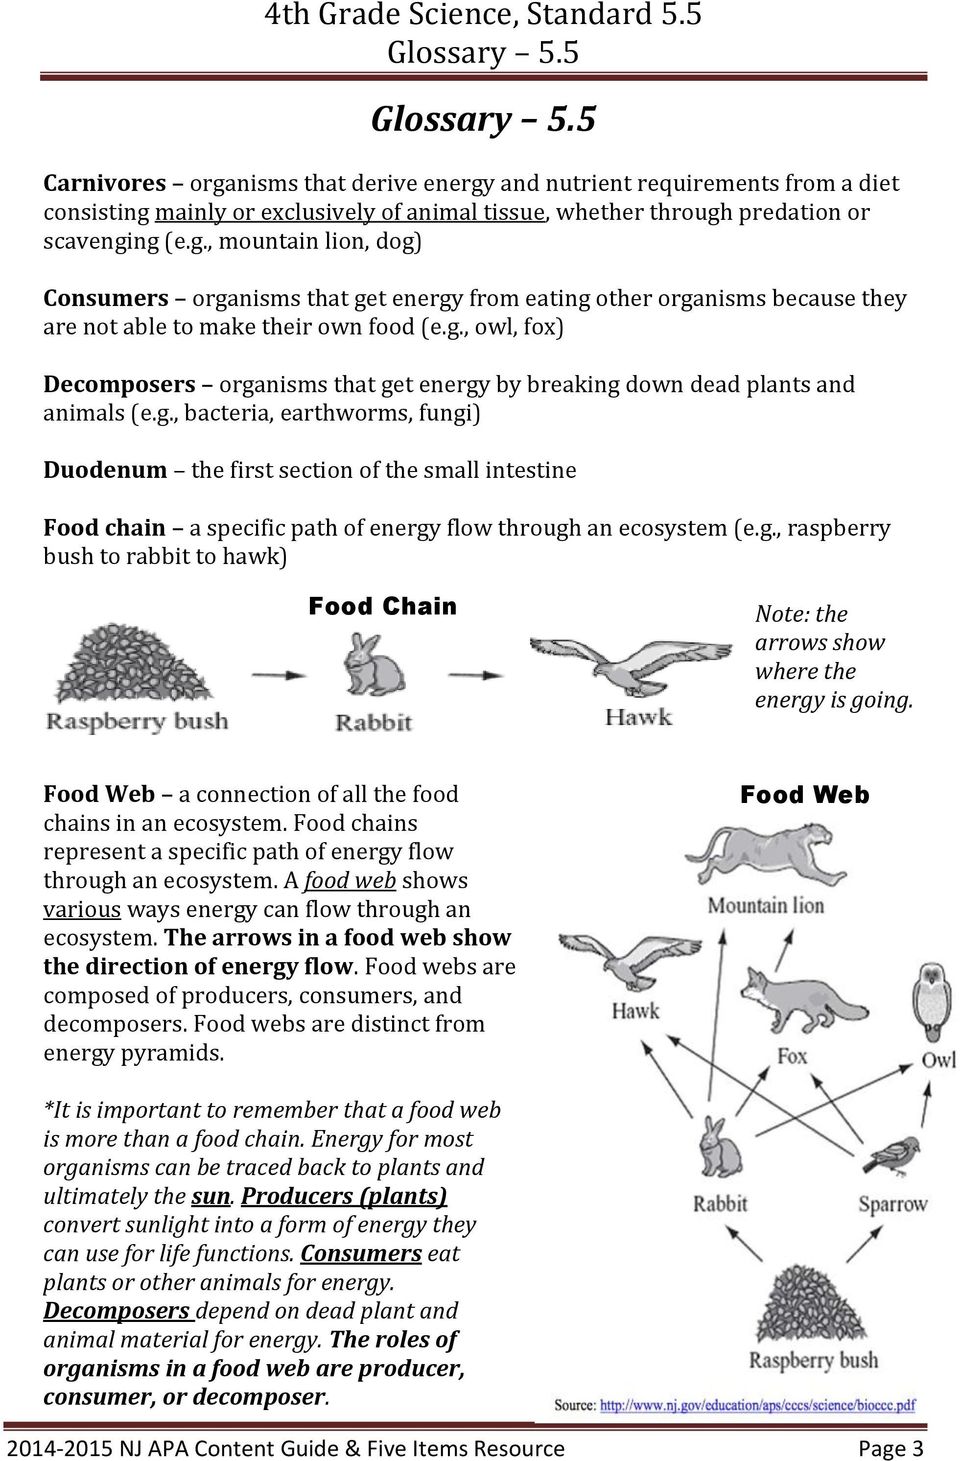 g., raspberry bush to rabbit to hawk) Food Chain Note: the arrows show where the energy is going. Food Web a connection of all the food chains in an ecosystem.